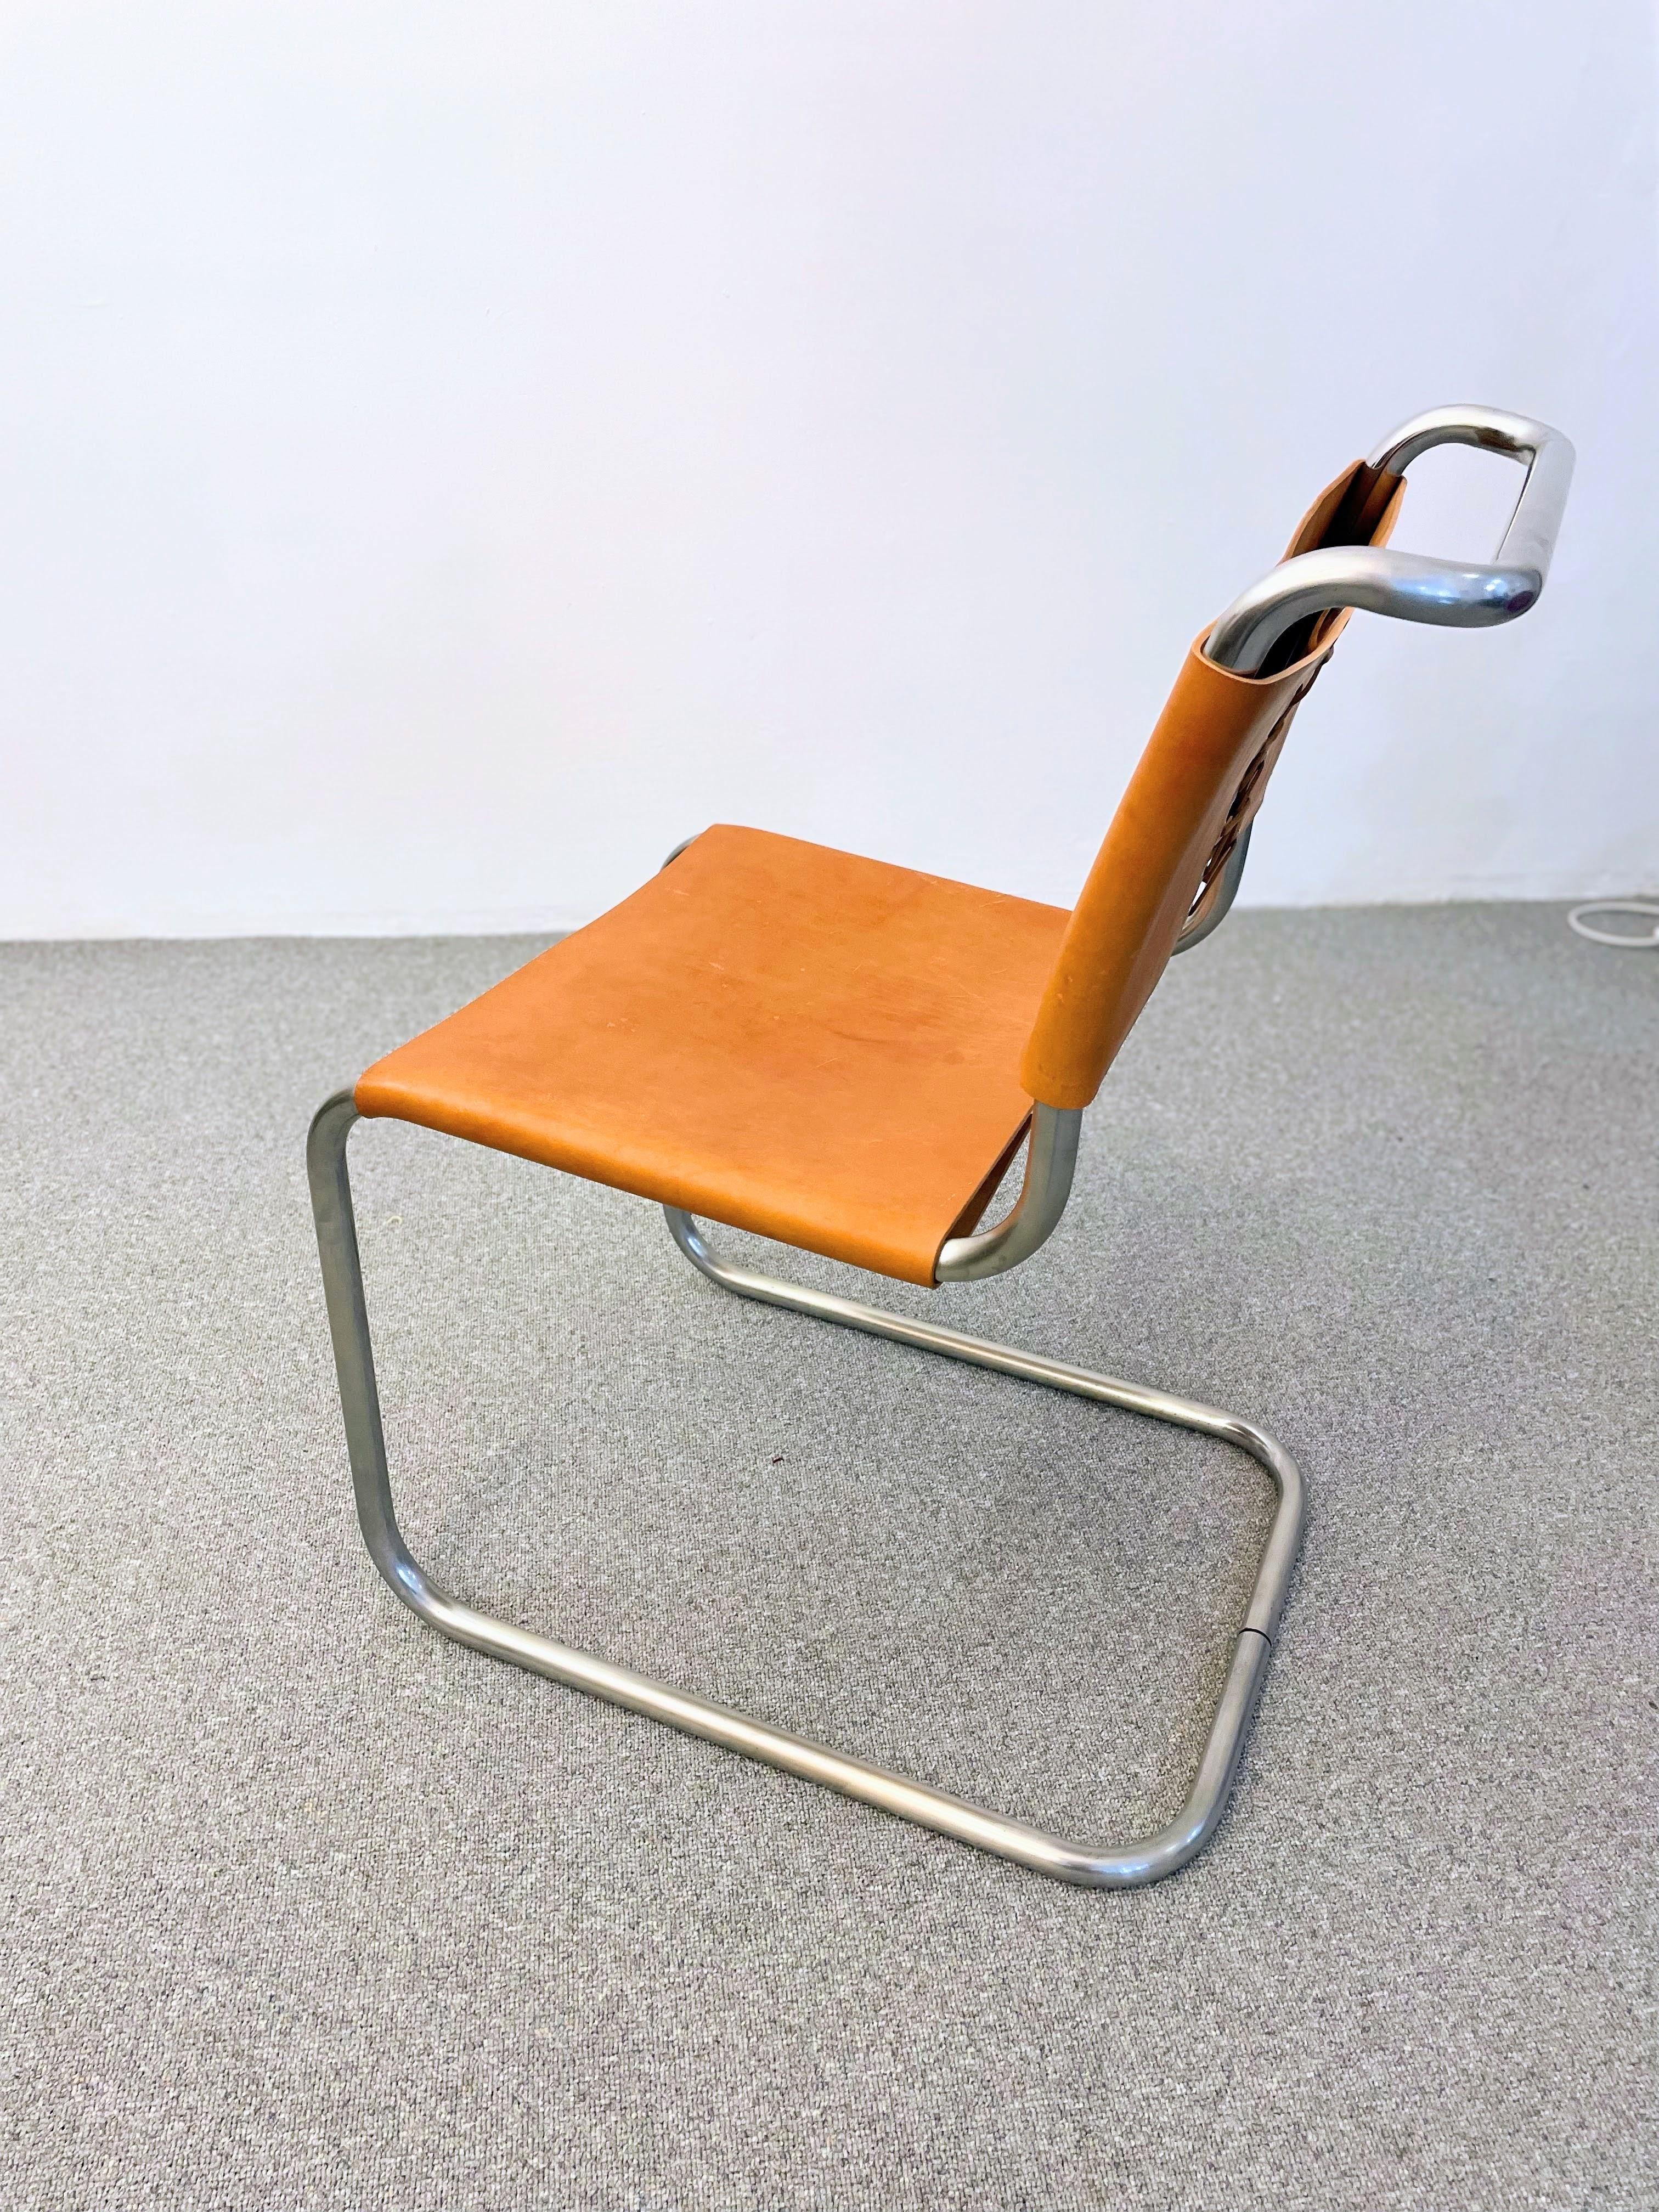 B33 Cantilevered Chair by Marcel Breuer 1